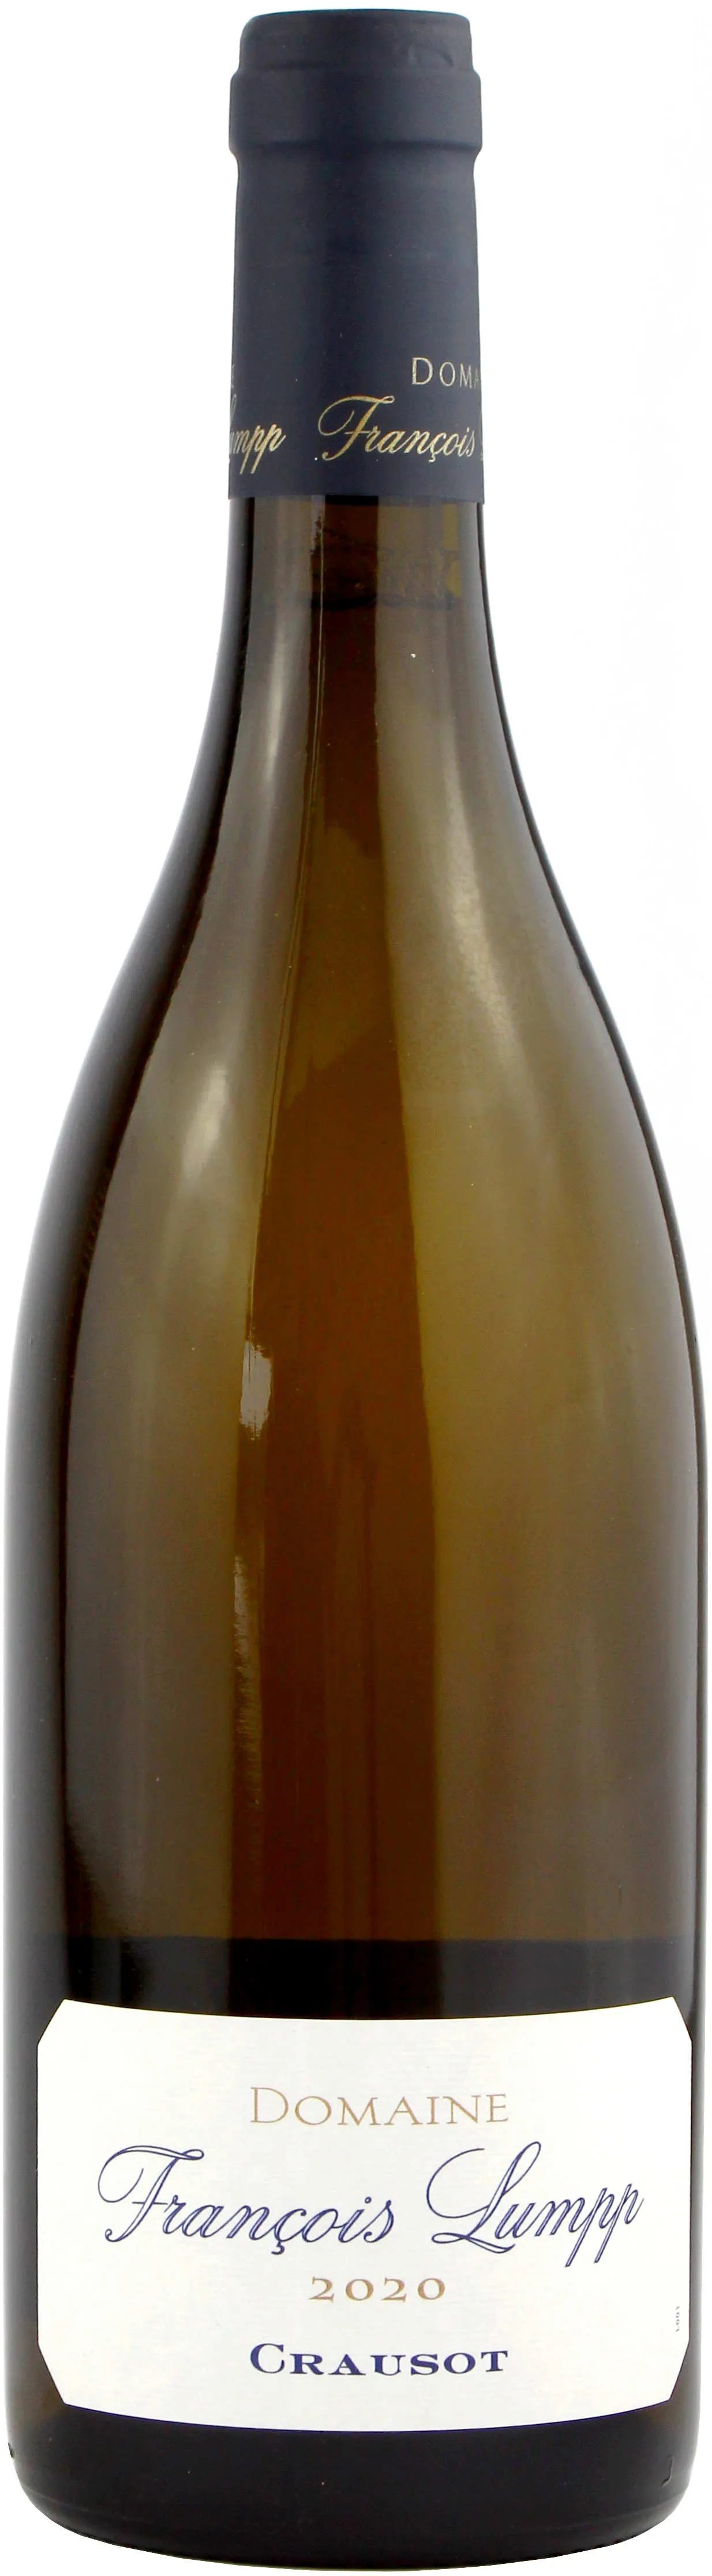 Bottle of Domaine François Lumpp Givry 1er Cru 'Crausot' Blancwith label visible